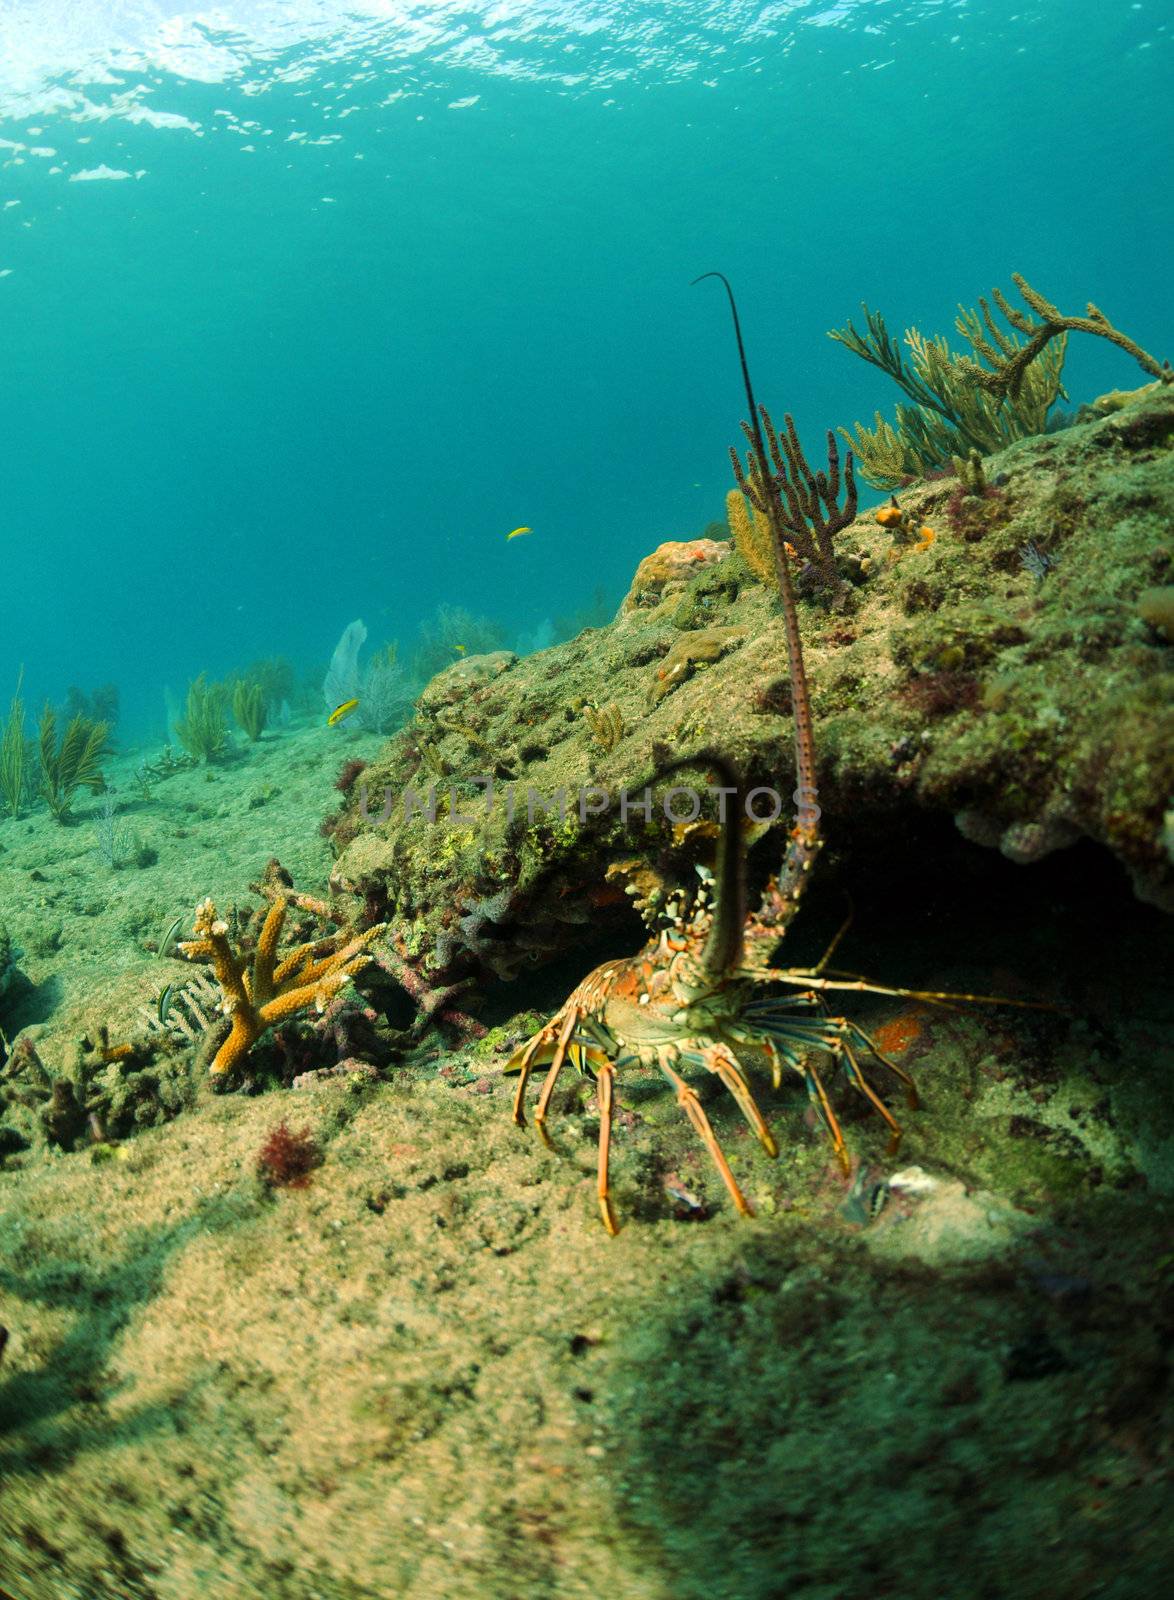 Spiny lobster in natural habitat in ocean with gorgonians in background